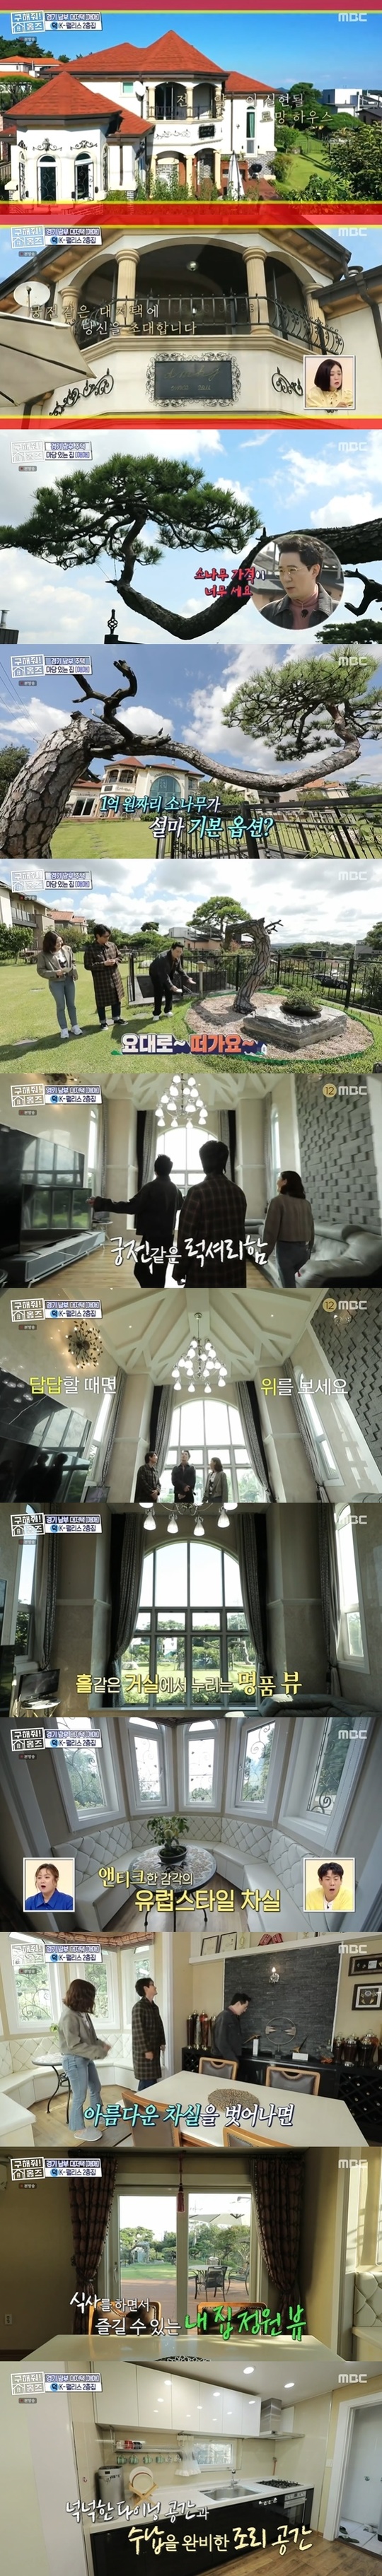 An old-fashioned, Europe-like house with a garden SONAMOO boasting 100 million was introduced.In the 126th MBC entertainment Where is My Home (hereinafter referred to as Homes) broadcast on October 3, the couple The Client, who realized the dream of a Madang house promised during their honeymoon 30 years after marriage, appeared.The Client wanted to have a townhouse with outdoor space, although it hoped for Hwaseong, Osan, Yongin and single-family houses within 40 minutes to Suwon City, where the office is located.The budget was up to 800 million won in sales.Duck Tim Boom introduced a large-scale house in Gungchori, Namyang-eup, Mars.As soon as Kim Sook saw the exterior of the house, the sale was so old-fashioned that he admired it as Pingyao feeling I saw outside Paris when I traveled to Europe backpack.The name of the house was K-Palace House.Madangs landscaping was also unusual; the boom pointed to the SONAMOO planted on the other hand, saying, SONAMOO prices are too high, whispering that the price is 100 million.However, the SONAMOO will be taken by the current landlord, and instead, all the remaining landscaping, including the expensive Baek Il Hong, was a basic option.Even if I entered the house, it continued to be resilient. The living room, which boasts a height of 5.6m, was surprisingly overwhelming, saying that even the expert Lim Sung-bin was a palace.The kitchen was eye-catching with a window-sheeted Europe-style car room, which looked like a wallpaper and floorpaper replacement on the first floor, but was ample in size.Then, on the second floor, a balcony in the garden view that did not require an earnings was found. On the second floor, there were two more rooms of good size.